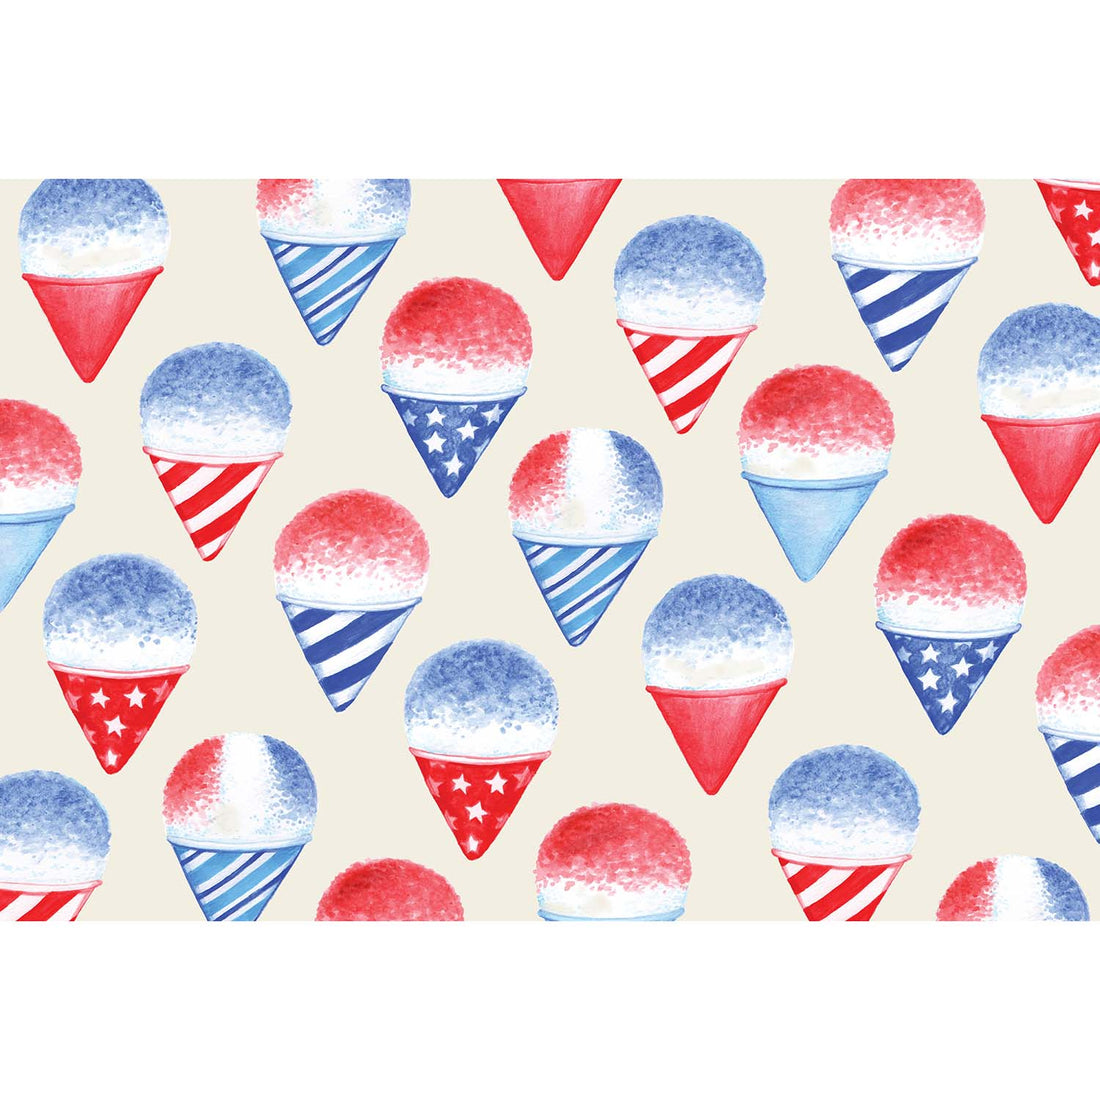 Evenly-spaced, illustrated snow cones in patriotic patterned paper cones, in red, white and blue on a cream background.